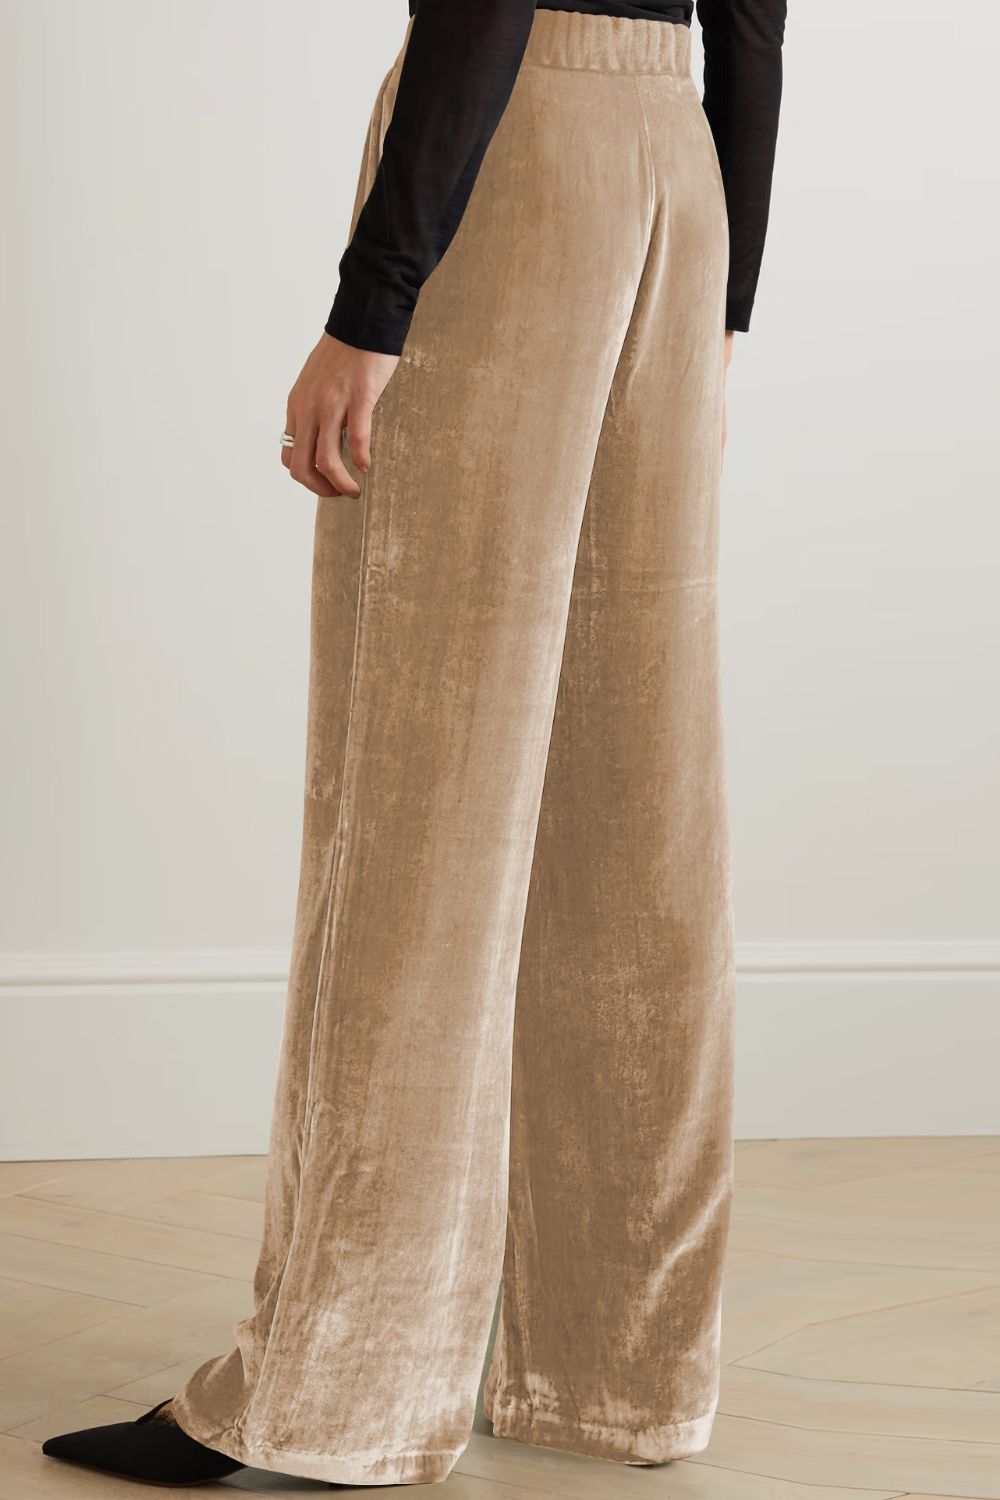 Loose Fit High Waist Long Pants with Pockets - Bottoms - Pants - 20 - 2024